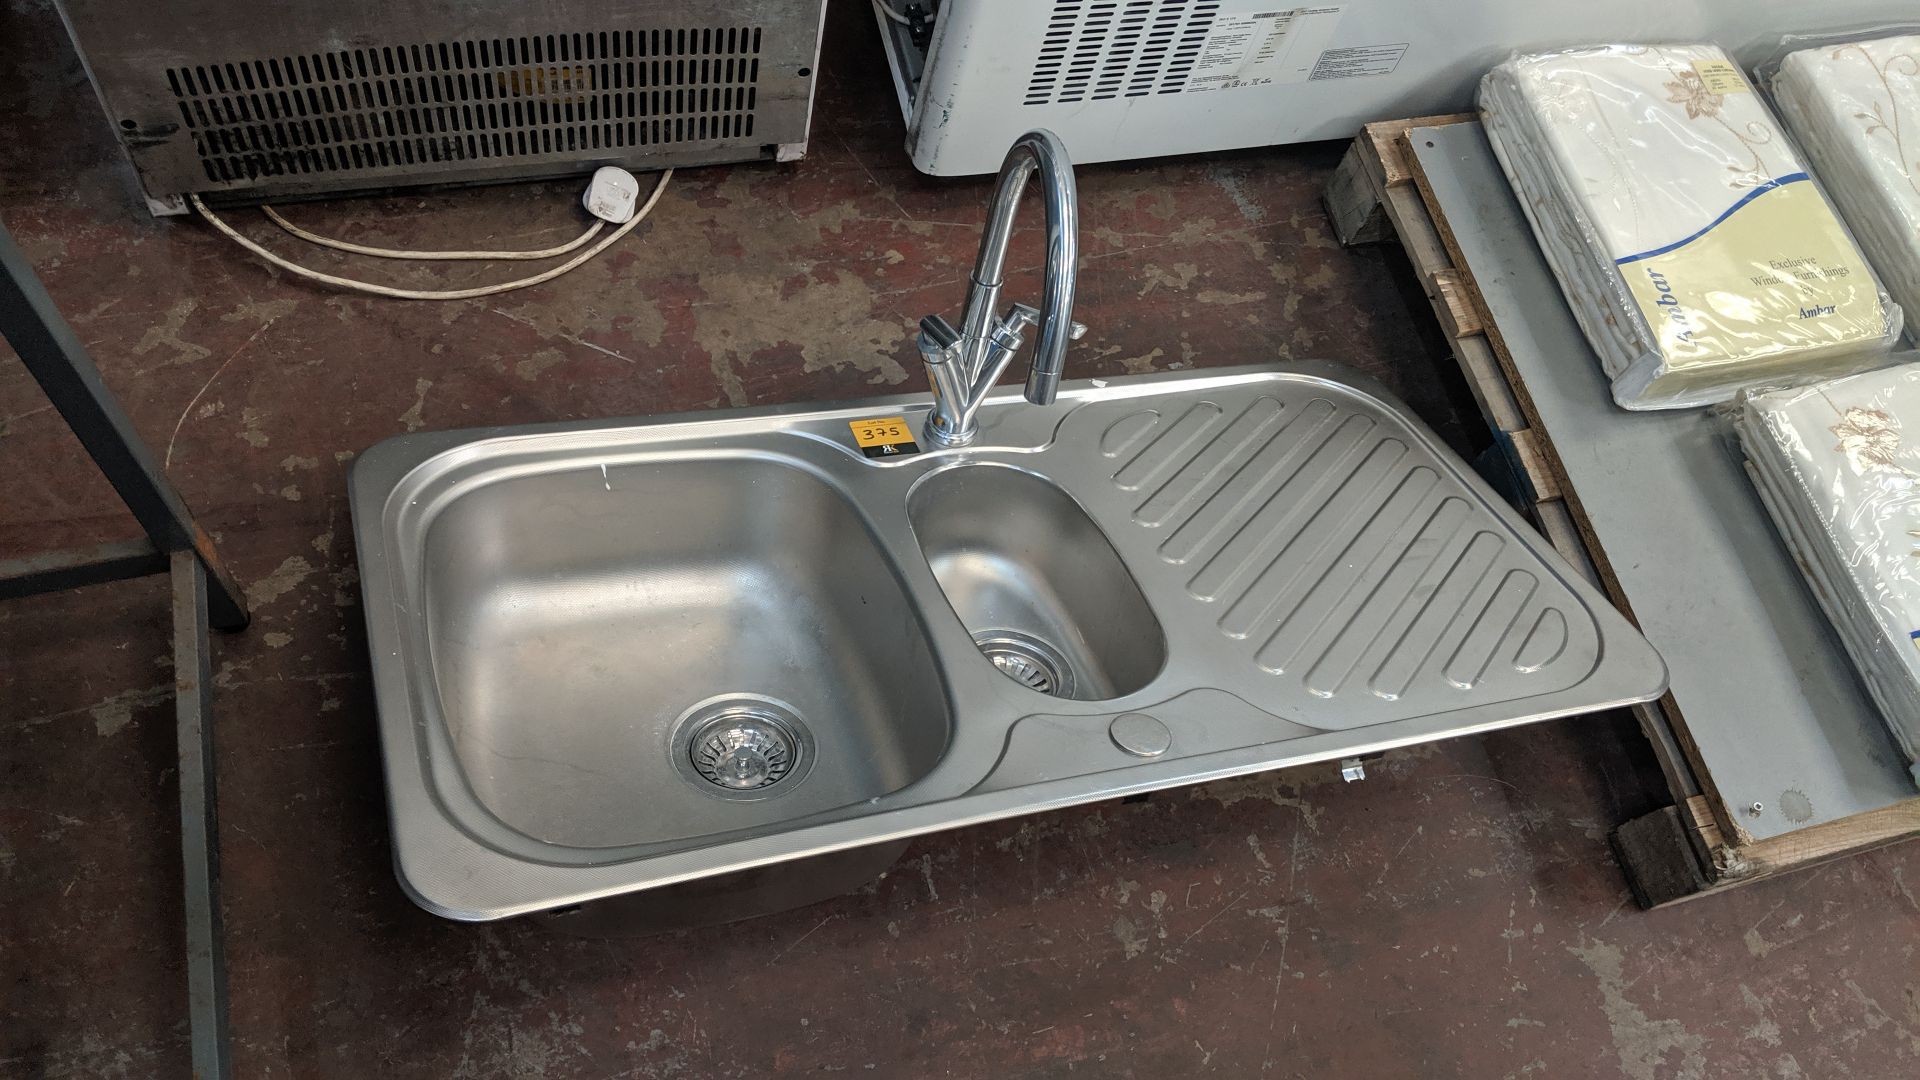 Stainless steel twin bowl sink with drainer unit & mixer tap IMPORTANT: Please remember goods